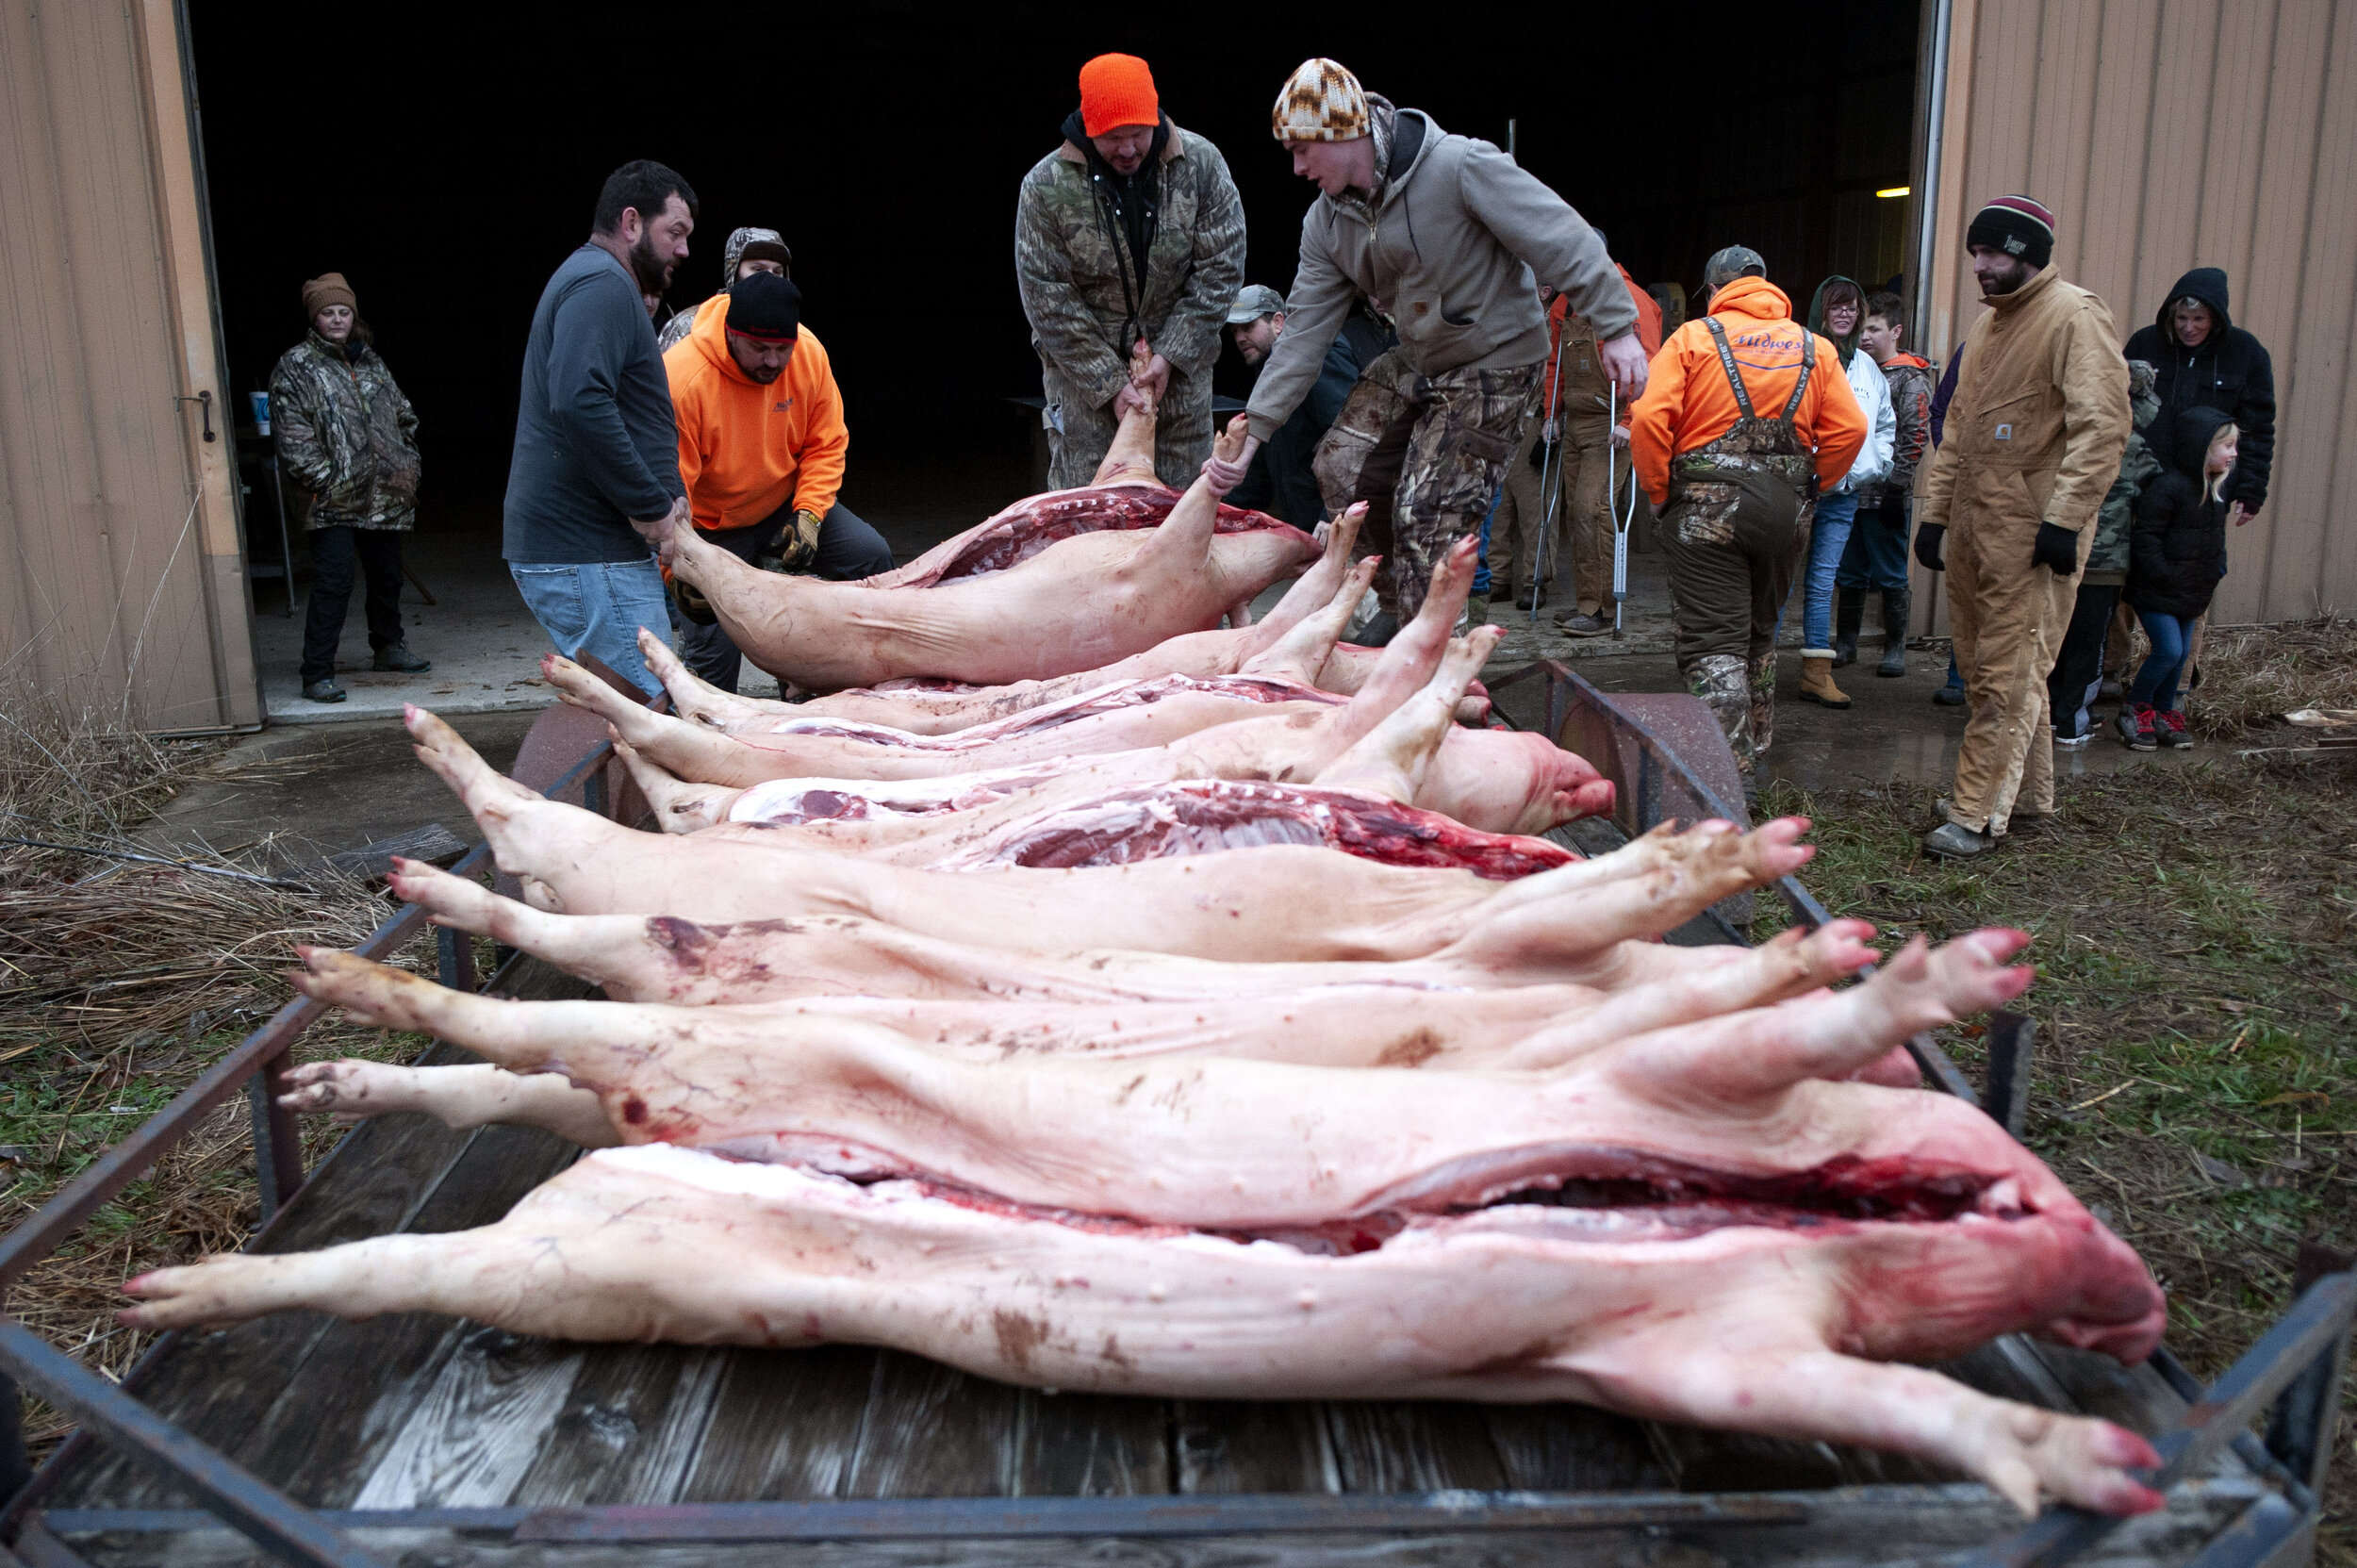  Handling hog from left: Nathan Richardet, Brian Leible, Mike Hotop and Mike's son Austin Hotop take a hog off the trailer for butchering. Seven hogs were butchered on the occasion. Mike said some of the products from the butchering would include sau